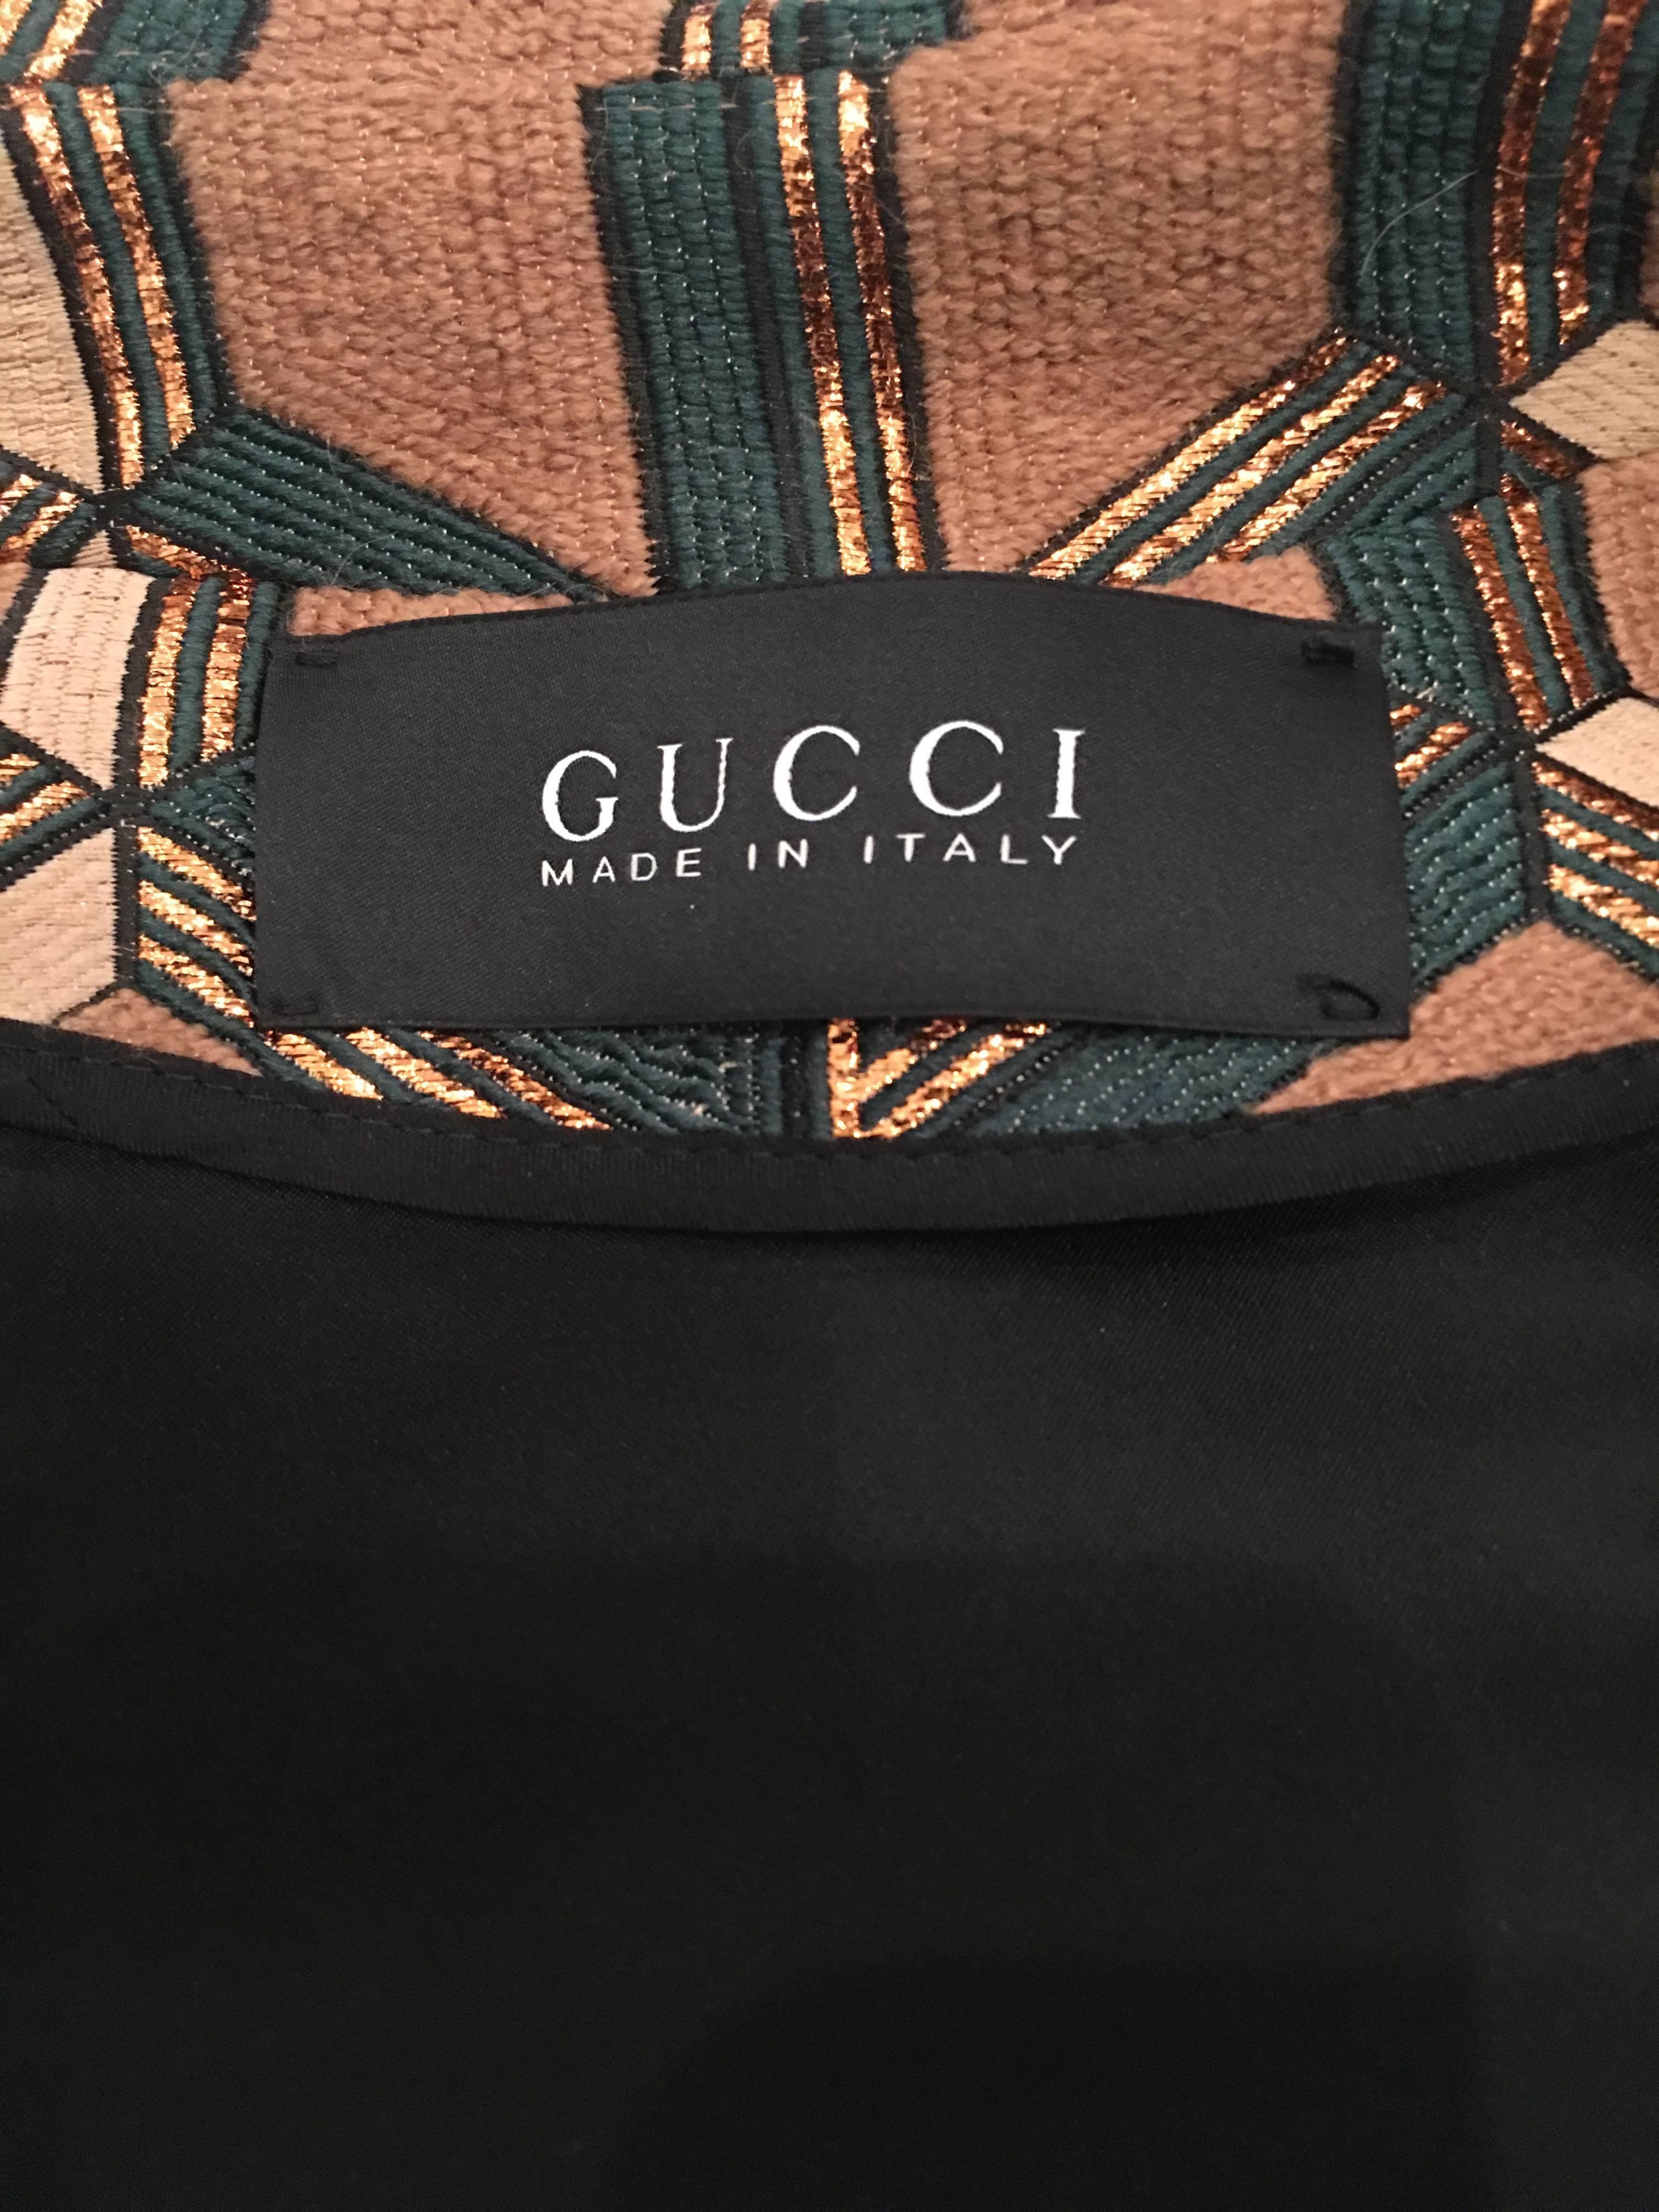 Women's or Men's Gucci Geometric Copper and Tan Double Breasted Wool Coat 